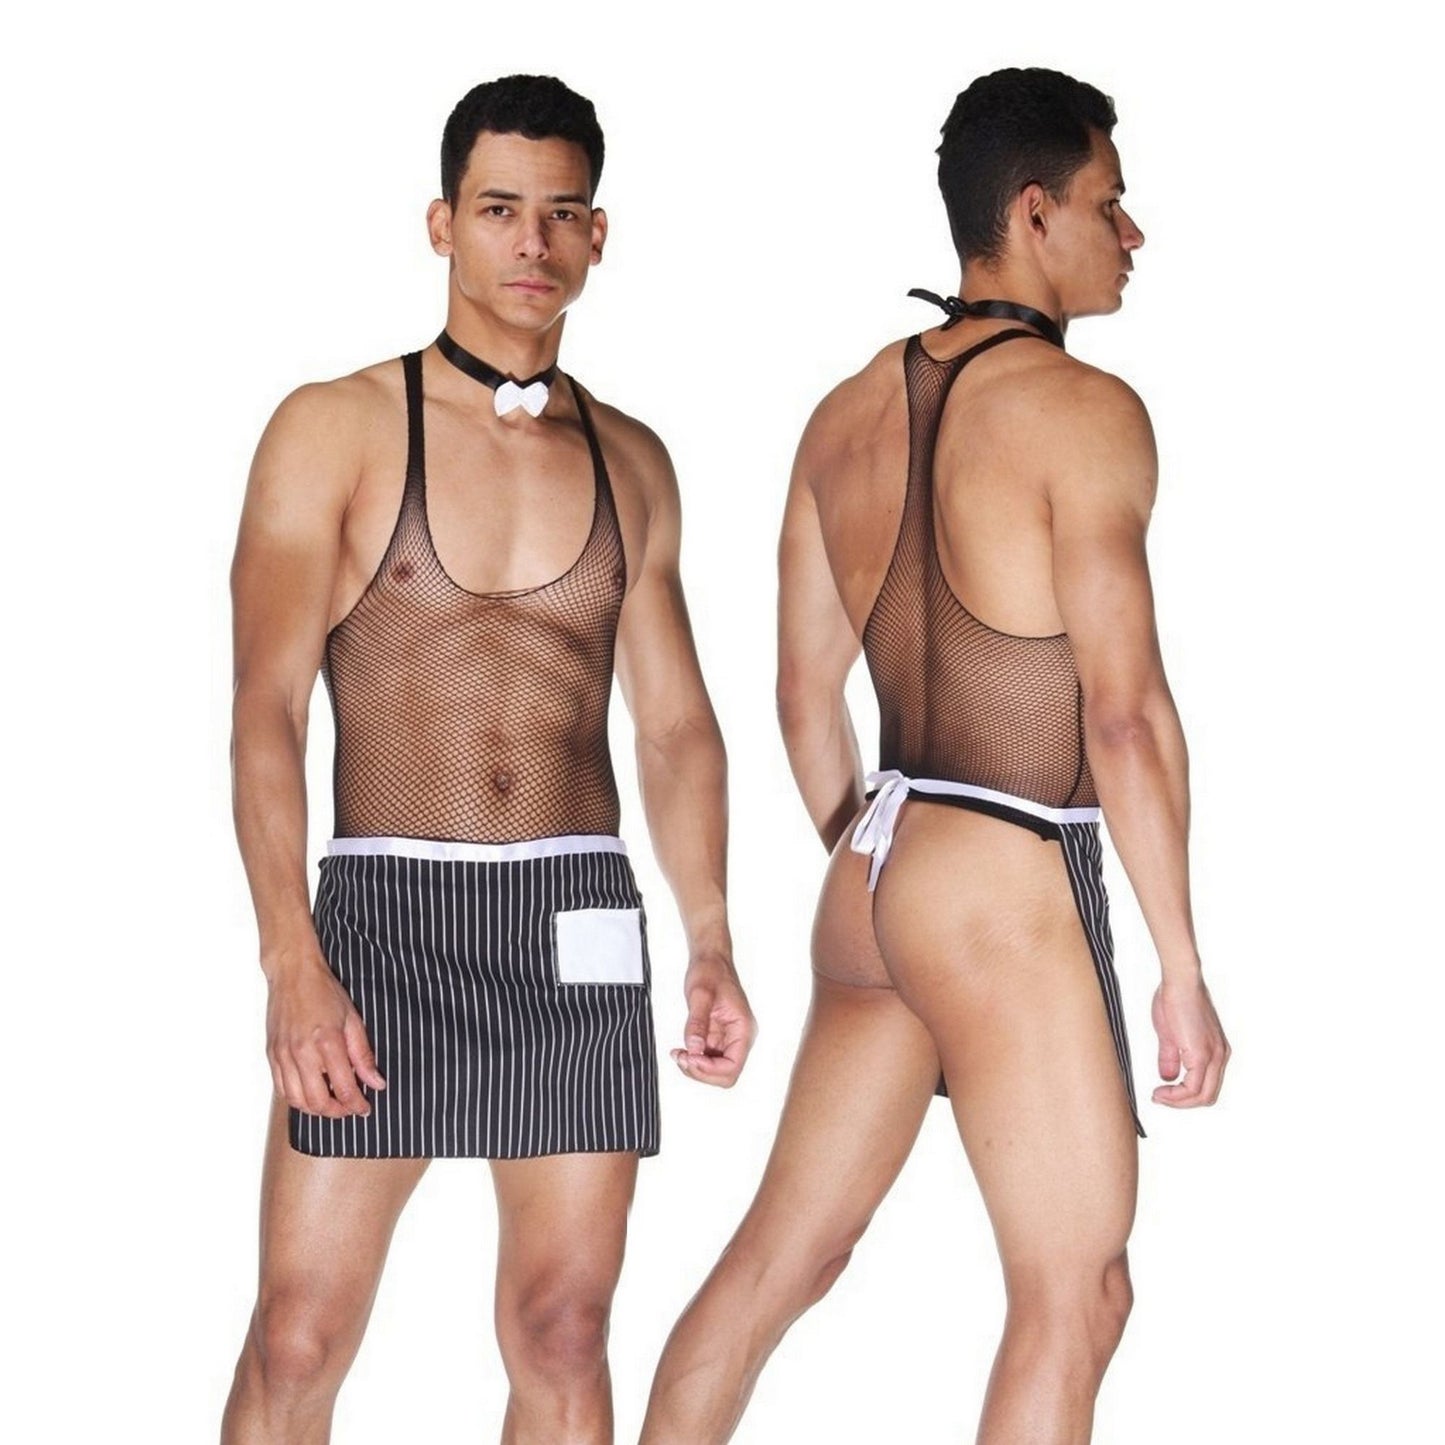 New Mens Sexy Maid Role Play Coustume Outfit Lingerie Boxer Brief